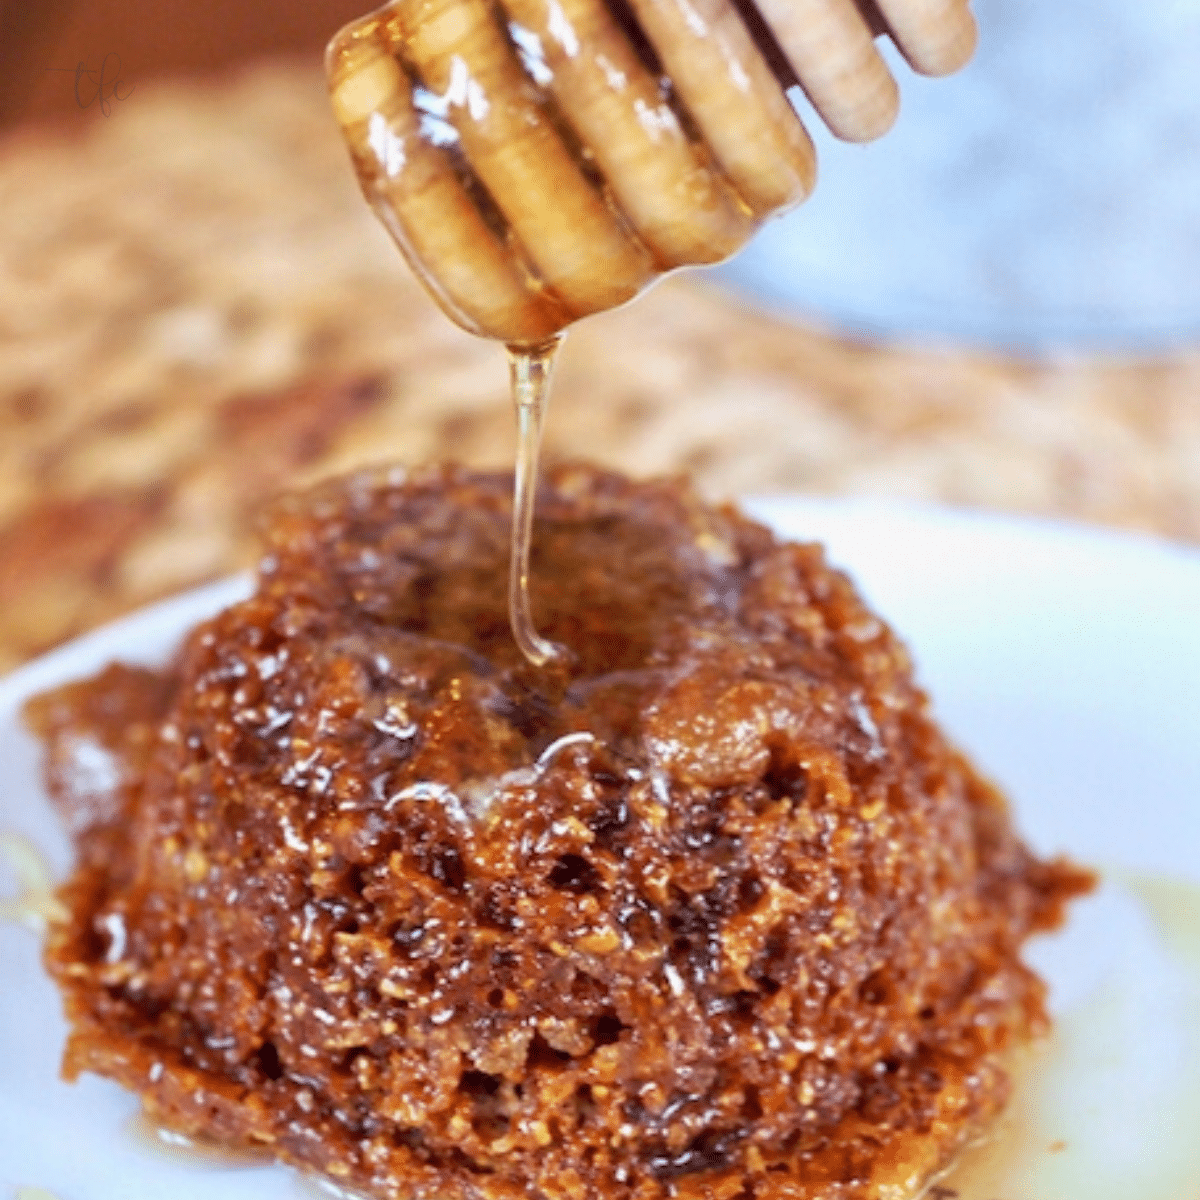 https://www.thefreshcooky.com/wp-content/uploads/2019/02/Mimis-Honey-Bran-Muffin-Square-2.png